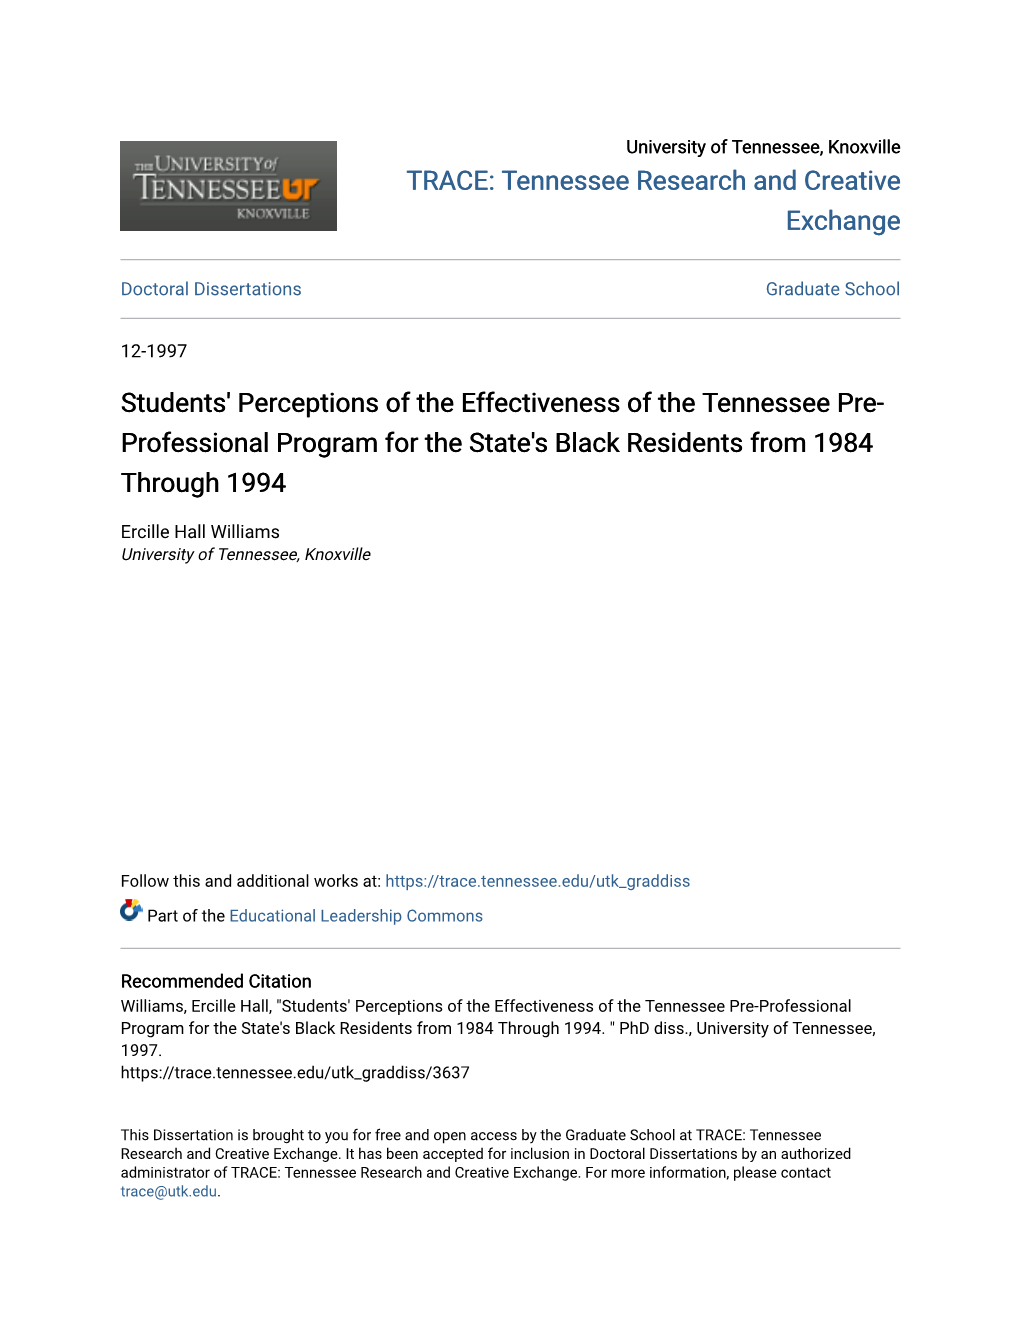 Students' Perceptions of the Effectiveness of the Tennessee Pre- Professional Program for the State's Black Residents from 1984 Through 1994